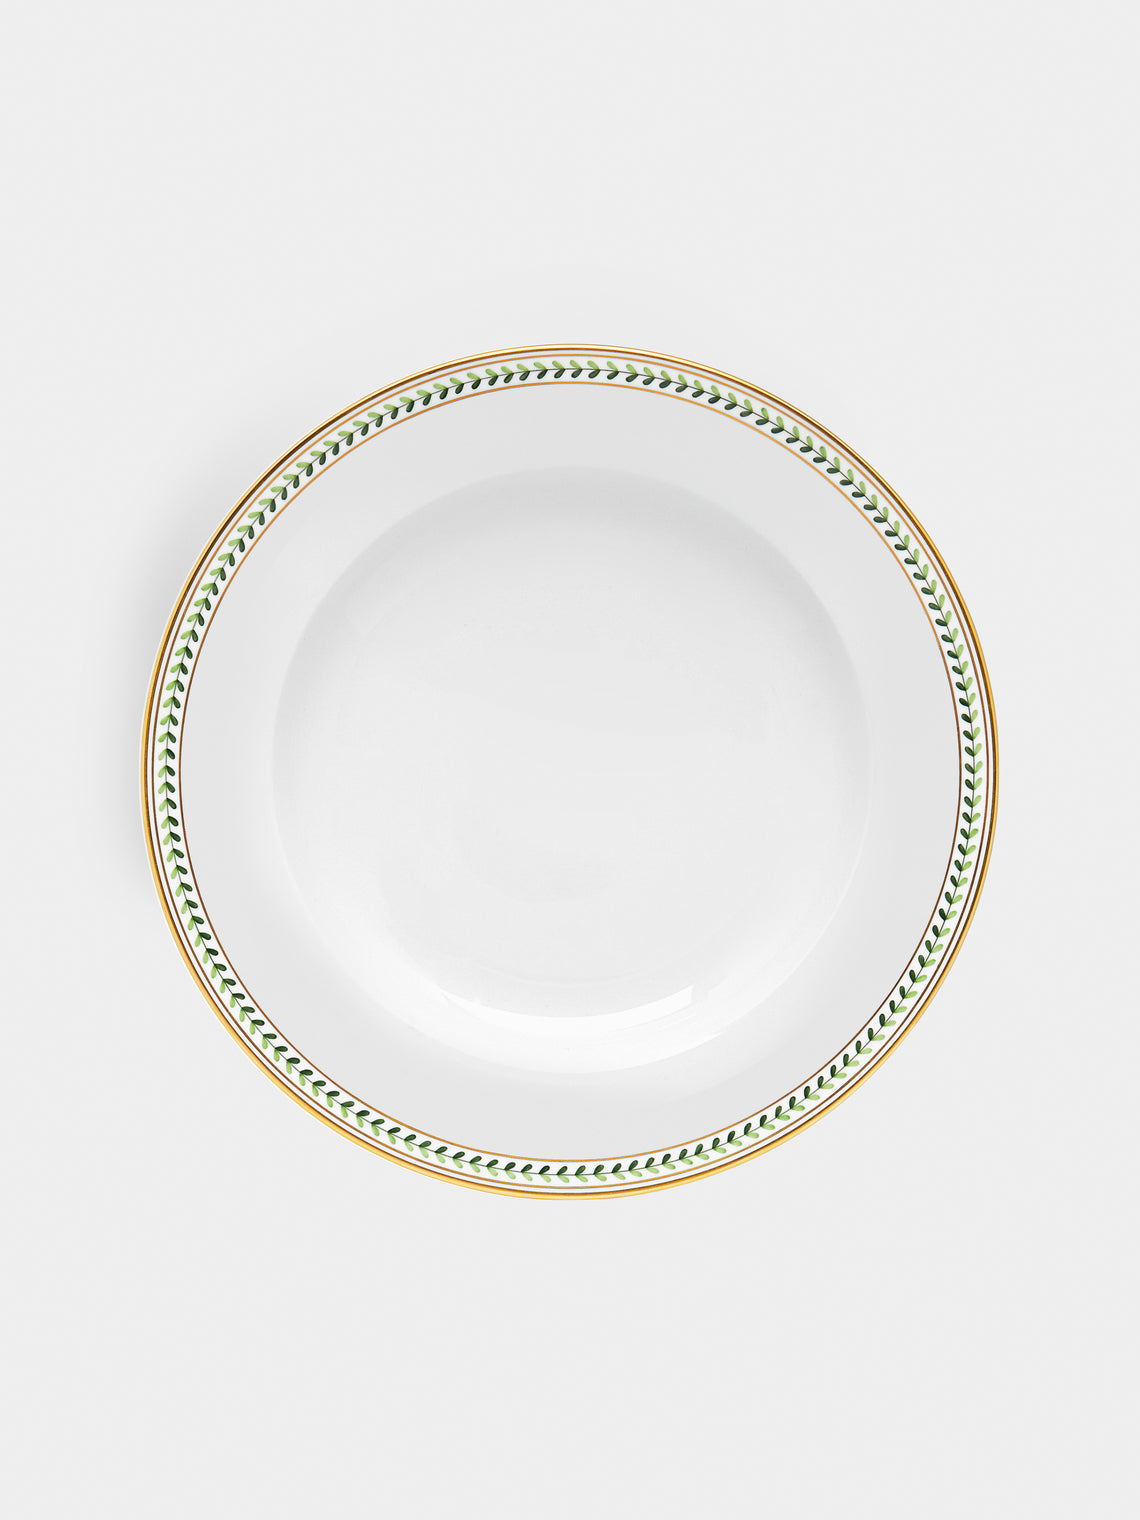 Augarten - Leafed Edge Hand-Painted Porcelain Dinner Plate - ABASK